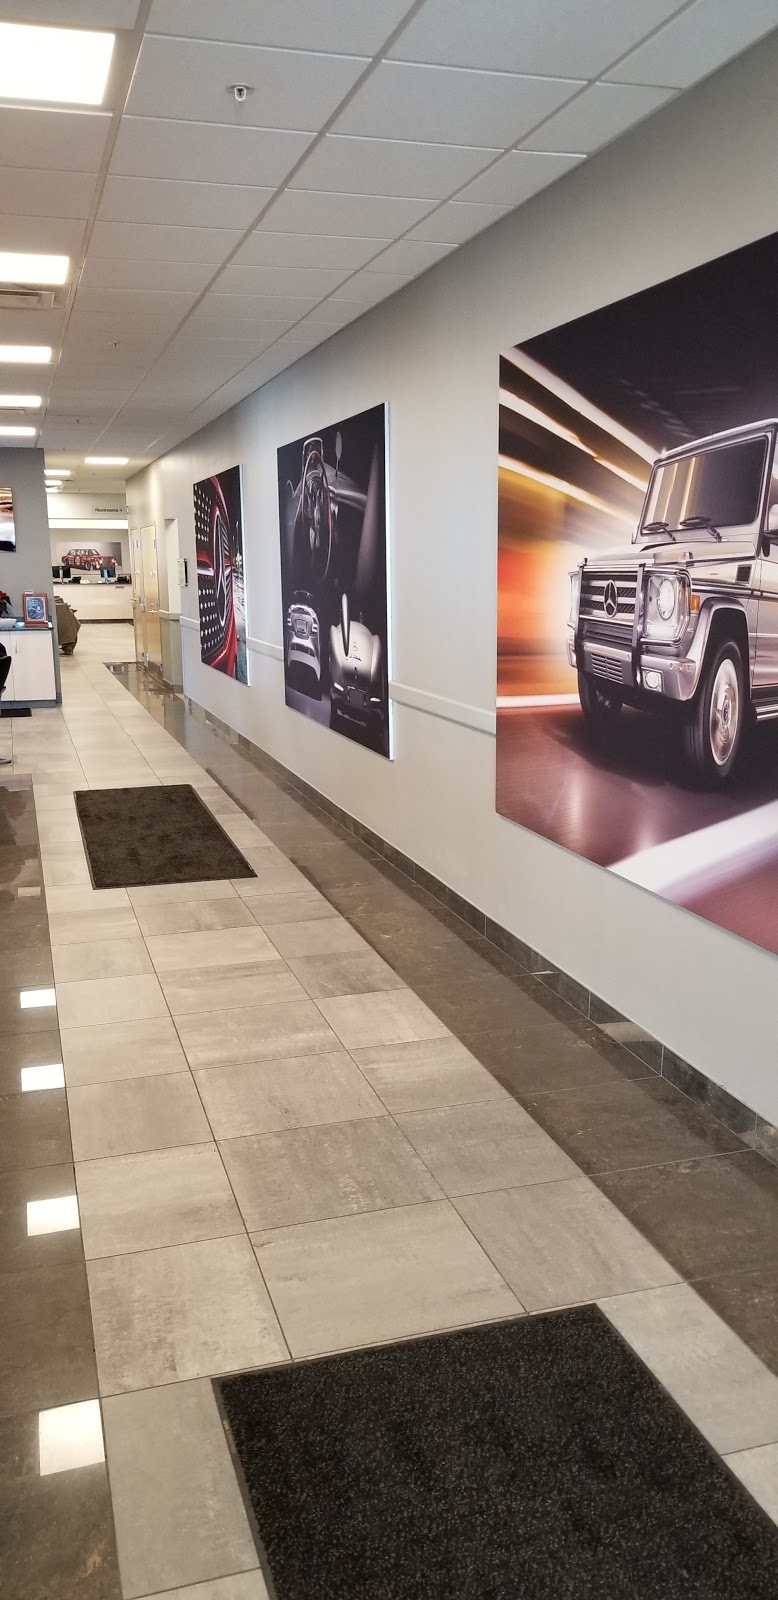 Mercedes-Benz of Bedford | 18122 Rockside Rd, Bedford, OH 44146, USA | Phone: (440) 439-0100